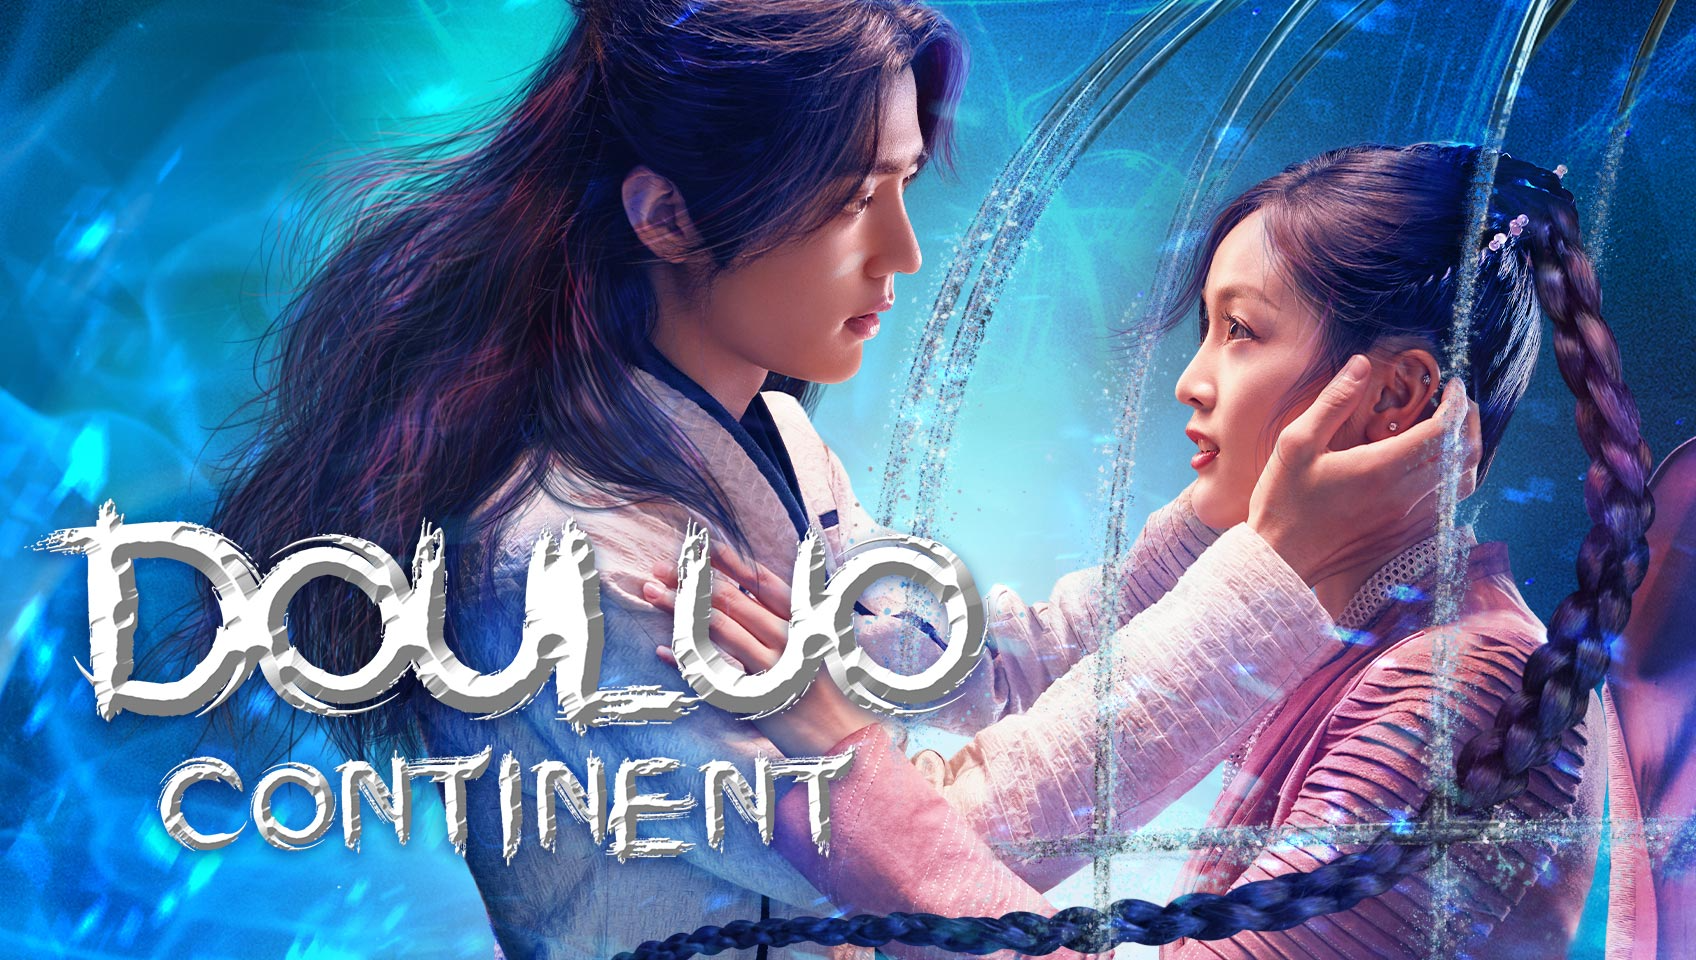 Ready go to ... https://bit.ly/2YOumu4 [ EP1: Douluo Continent - Watch HD Video Online - WeTV]